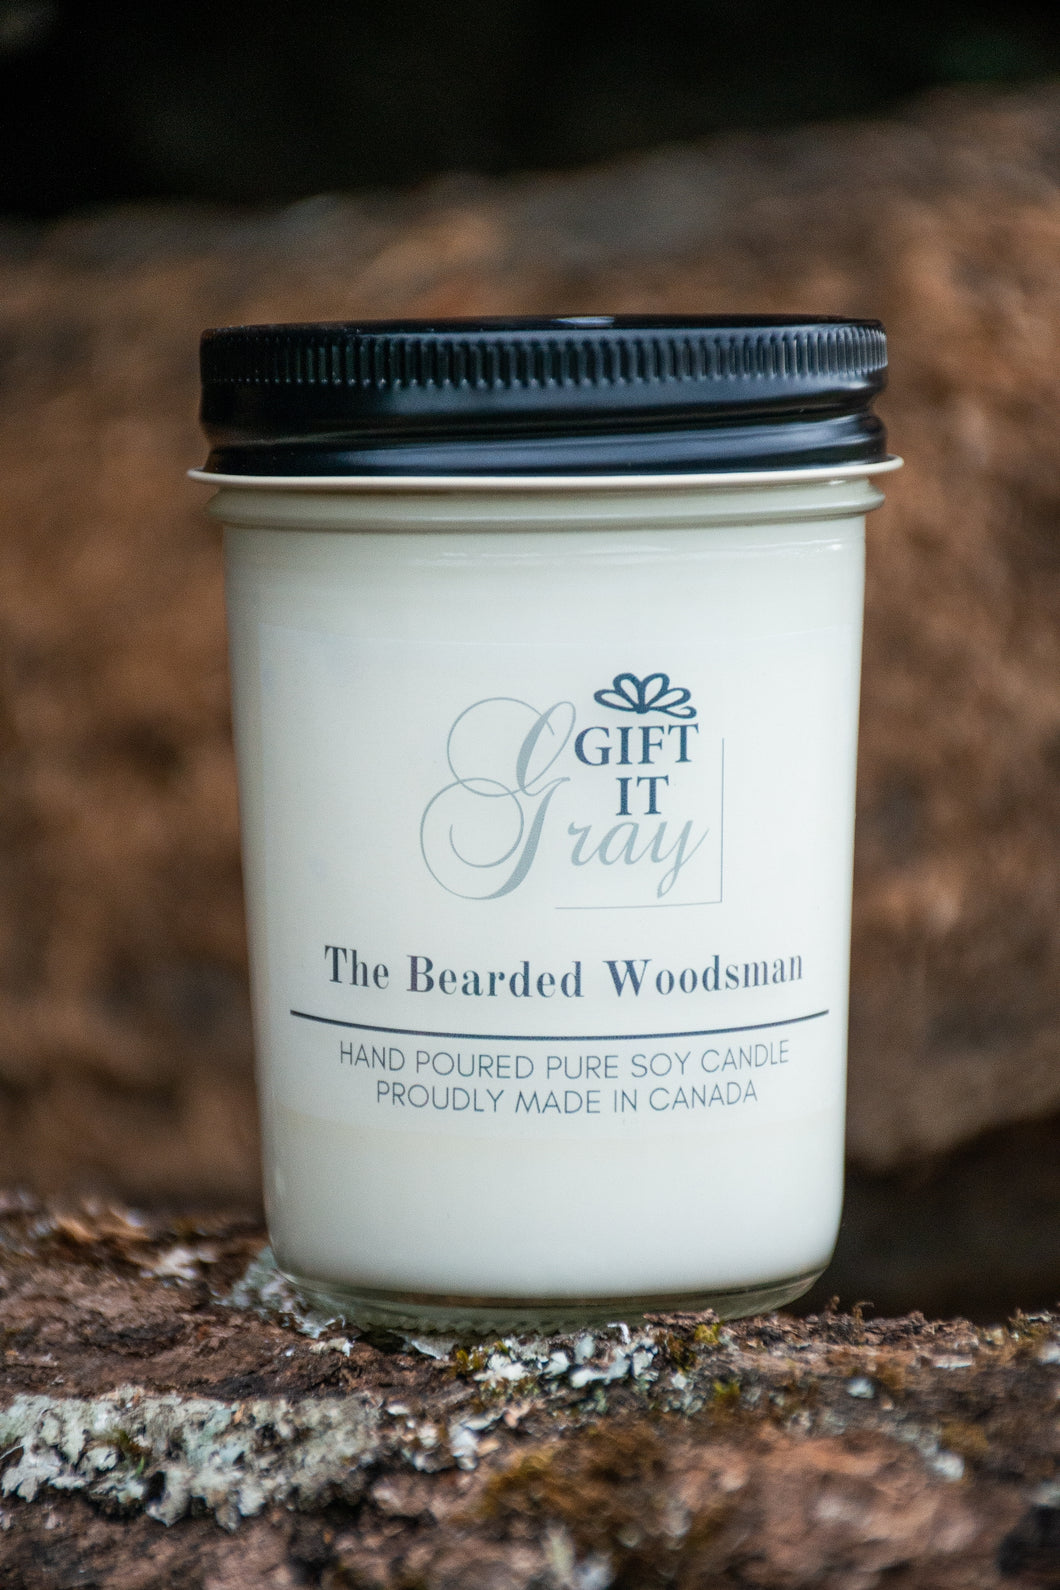 The Bearded Woodsman Gift It Gray Soy Candle